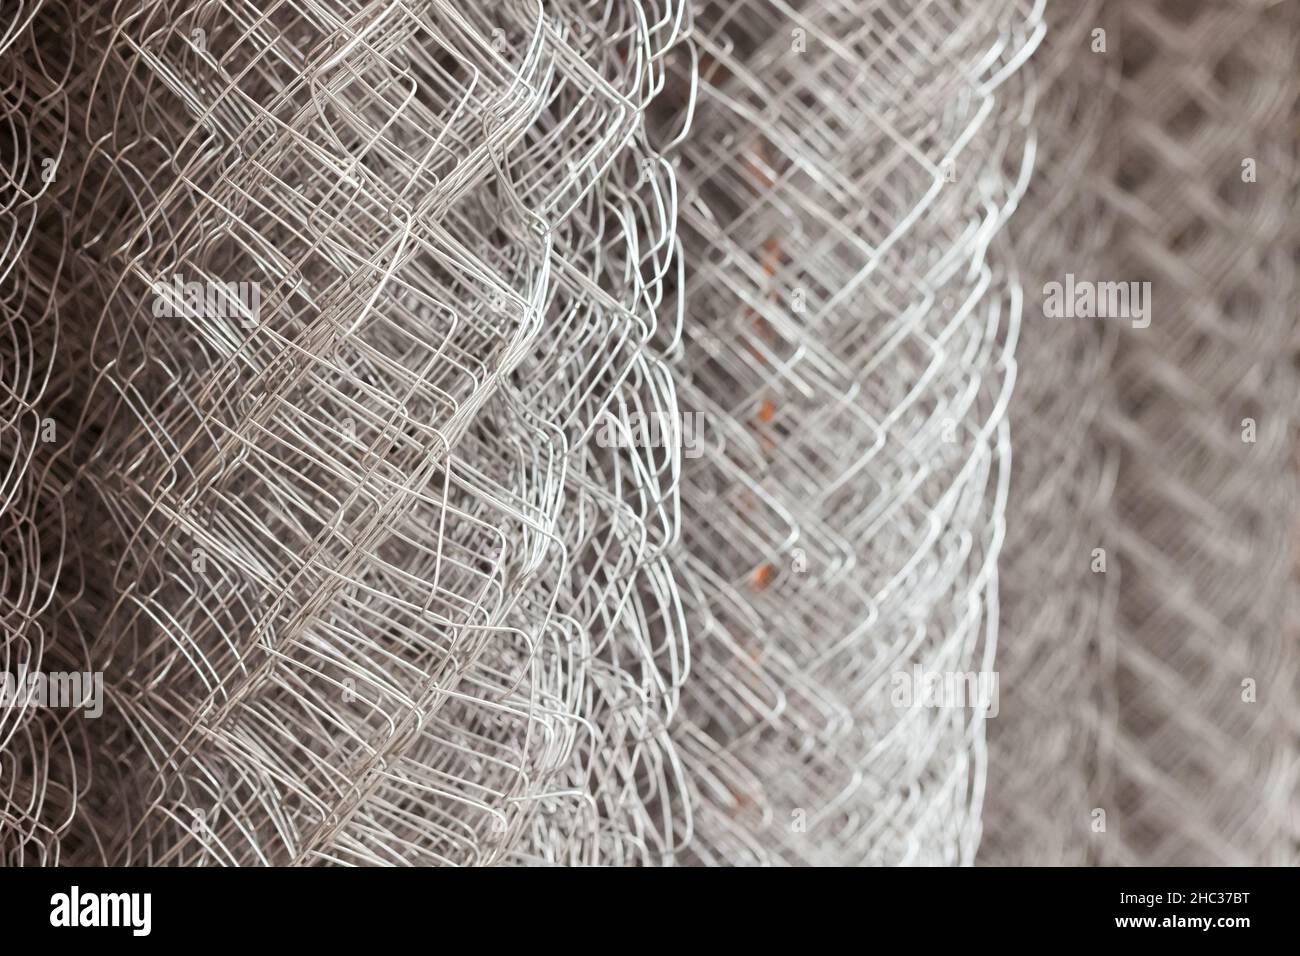 Metal mesh netting rolled into rolls. Rolled chain-link fence. Stock Photo